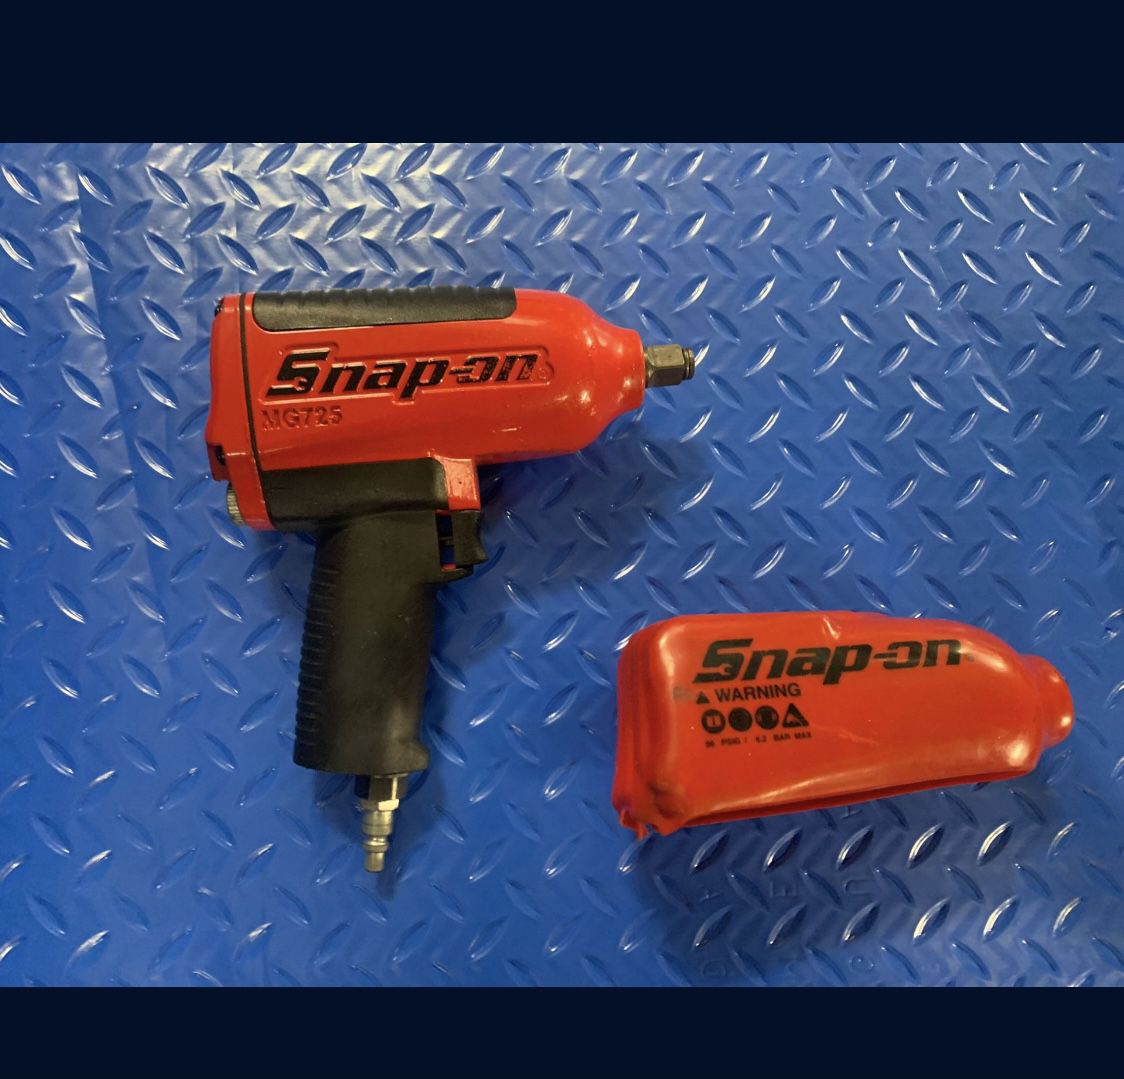 Snap-on 1/2" Air Impact Wrench MG725 Red